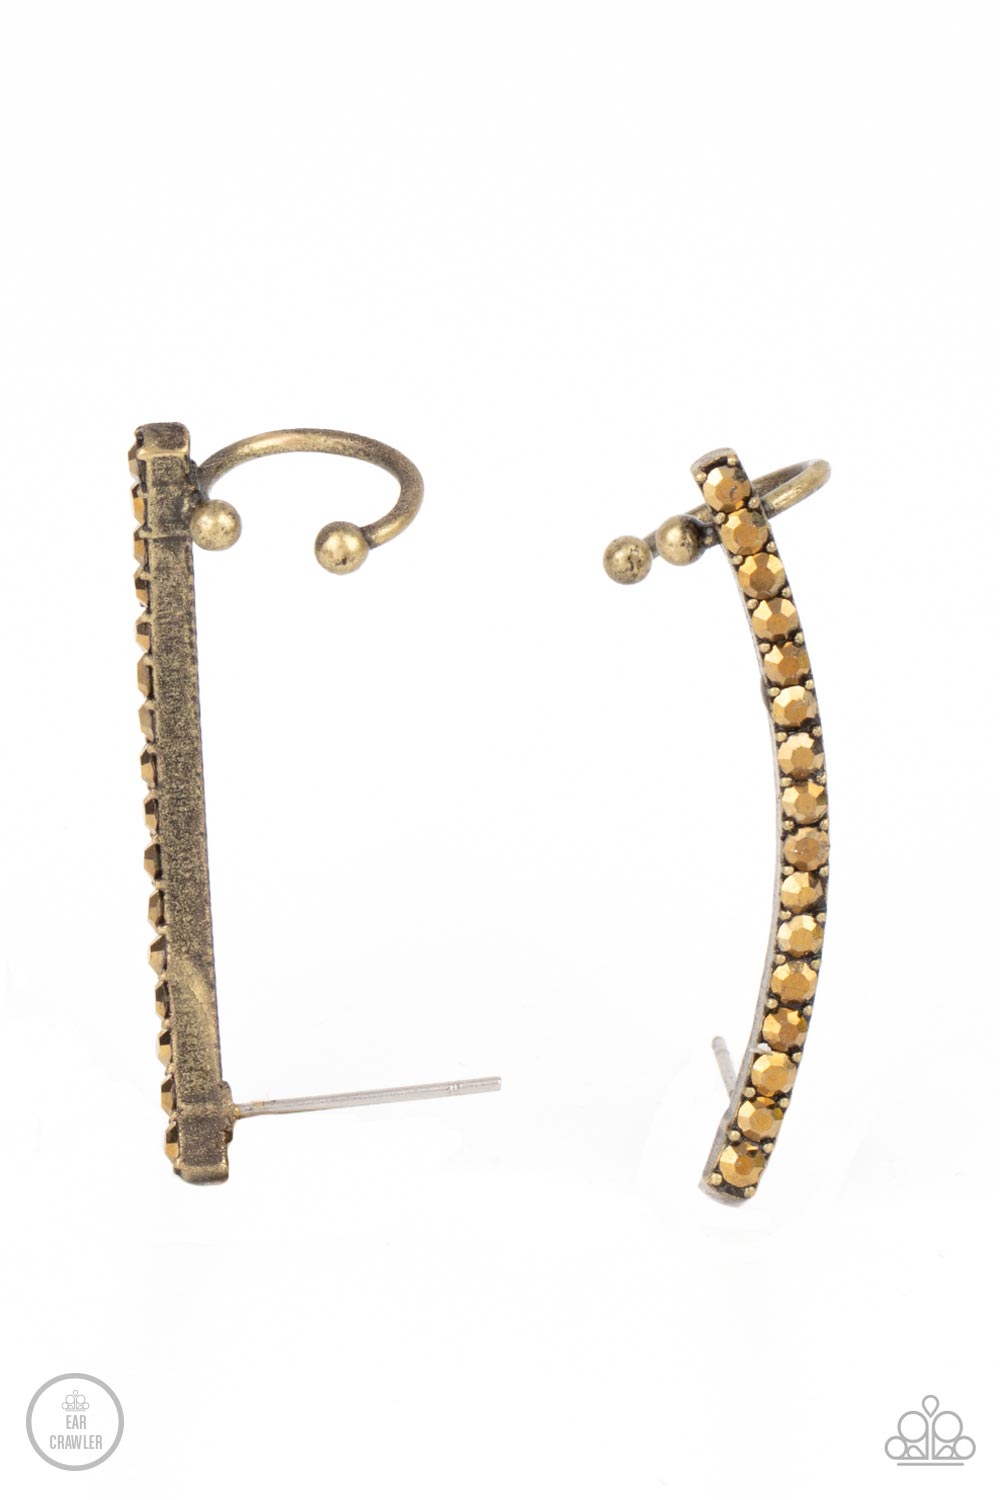 Give Me The SWOOP Brass Post Earring - Paparazzi Accessories  A dainty row of glitzy aurum rhinestones is encrusted along a gritty brass bar that swoops up the ear for a smoldering style. Features a dainty cuff attached to the top for a secure fit.  All Paparazzi Accessories are lead free and nickel free!  Sold as one pair of ear crawlers.